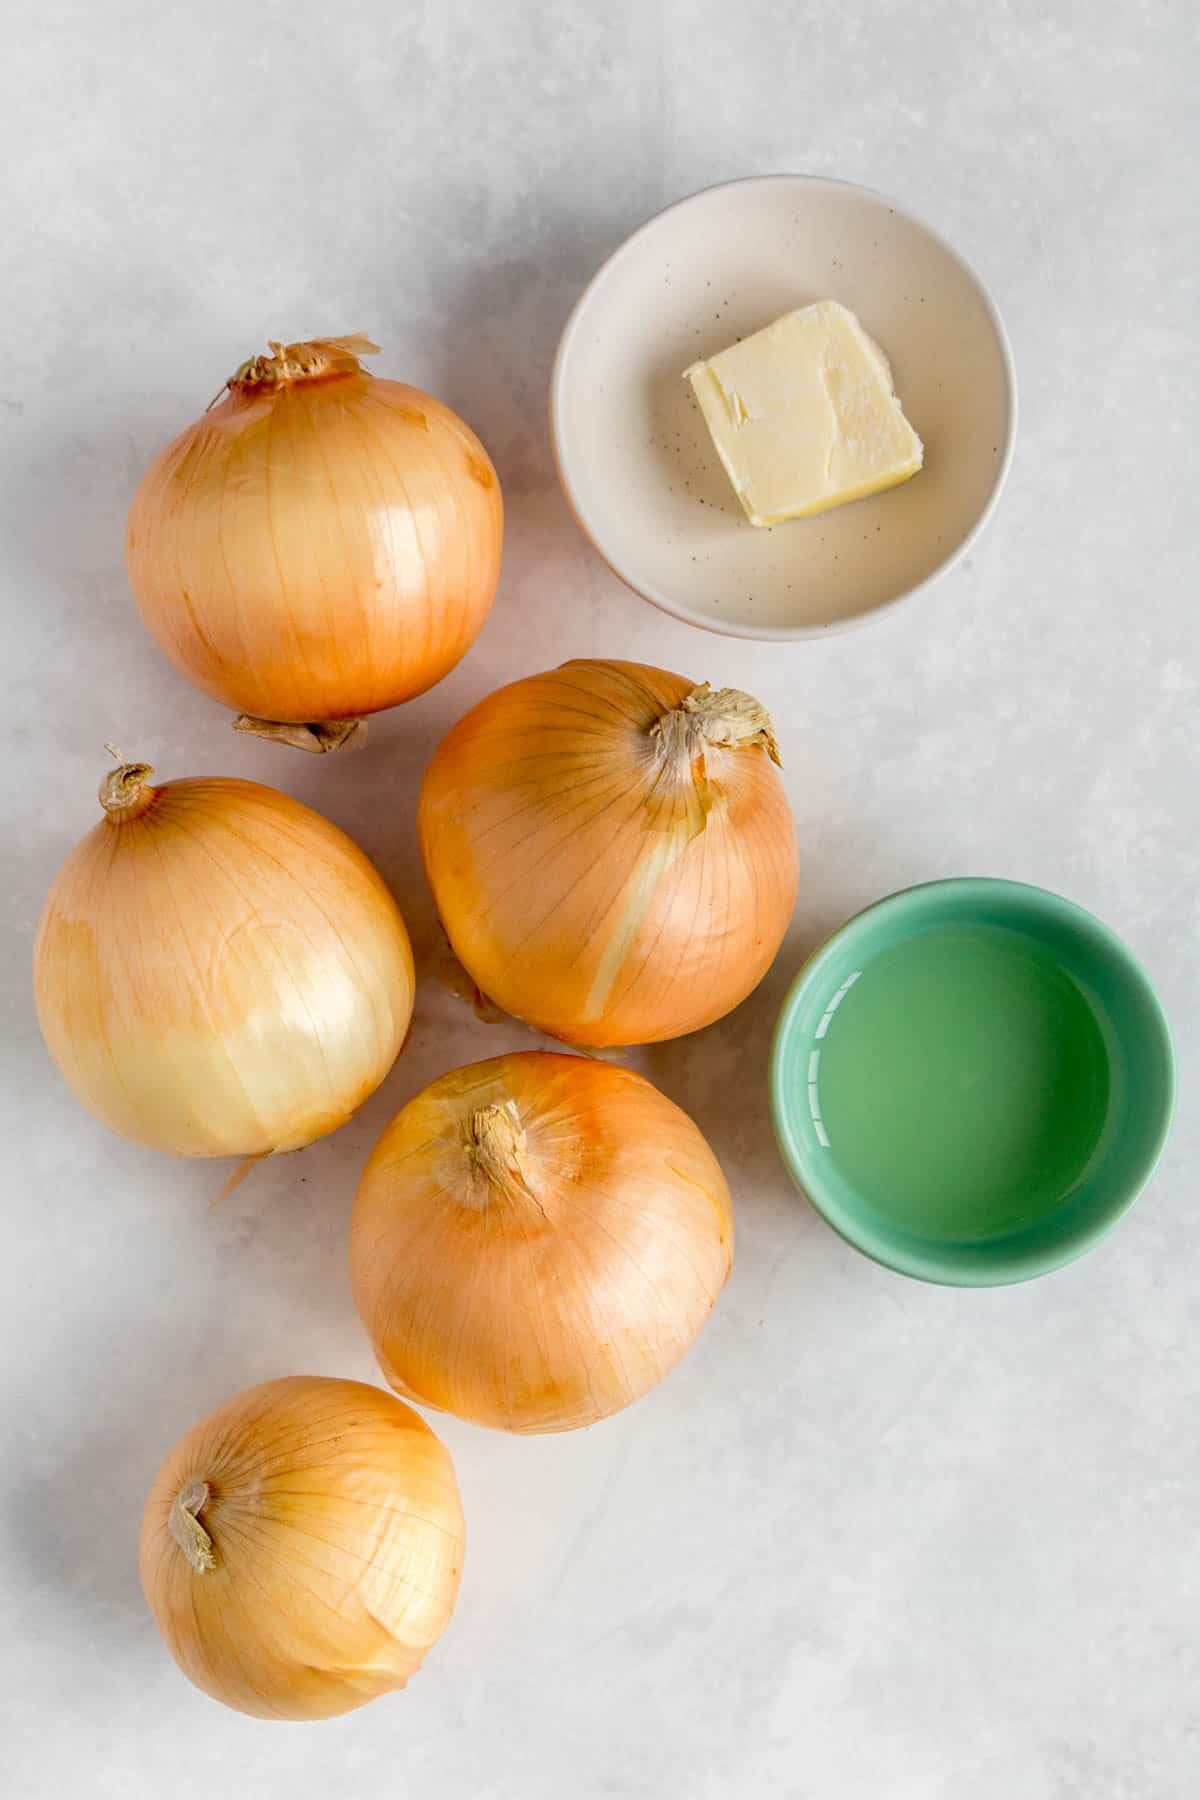 Ingredients needed to make caramelized onion.